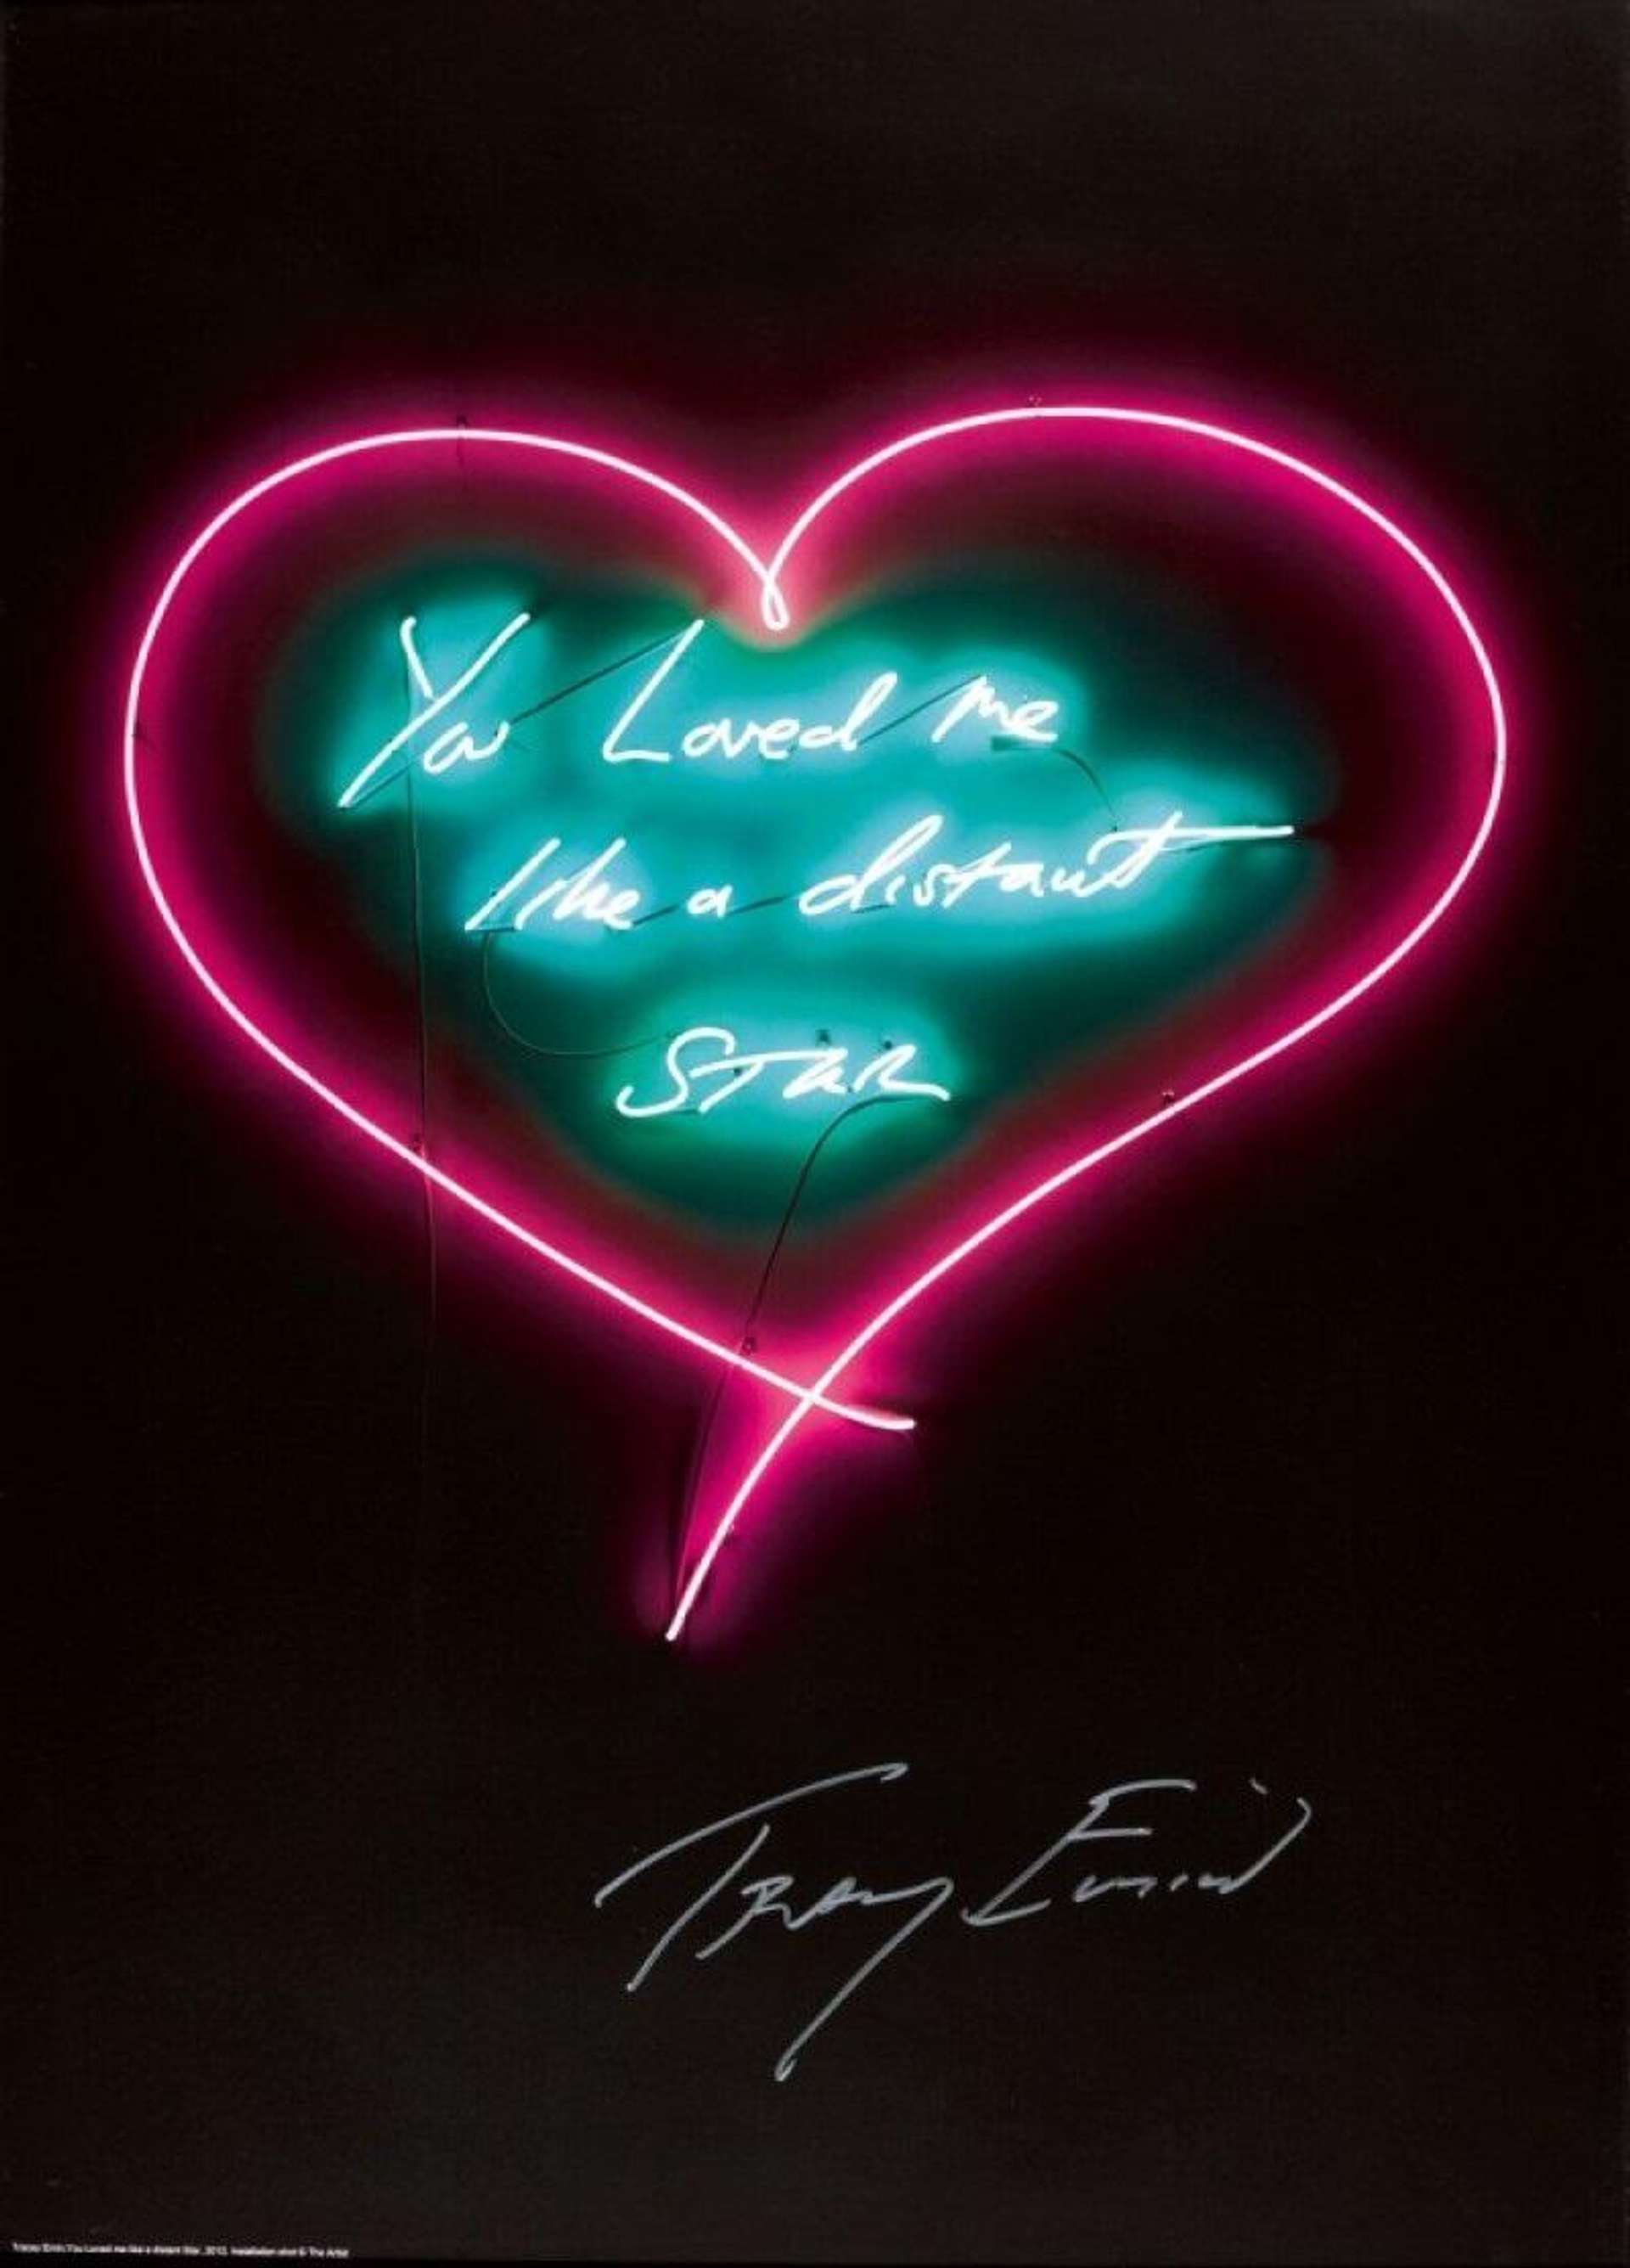 You Loved Me Like A Distant Star by Tracey Emin